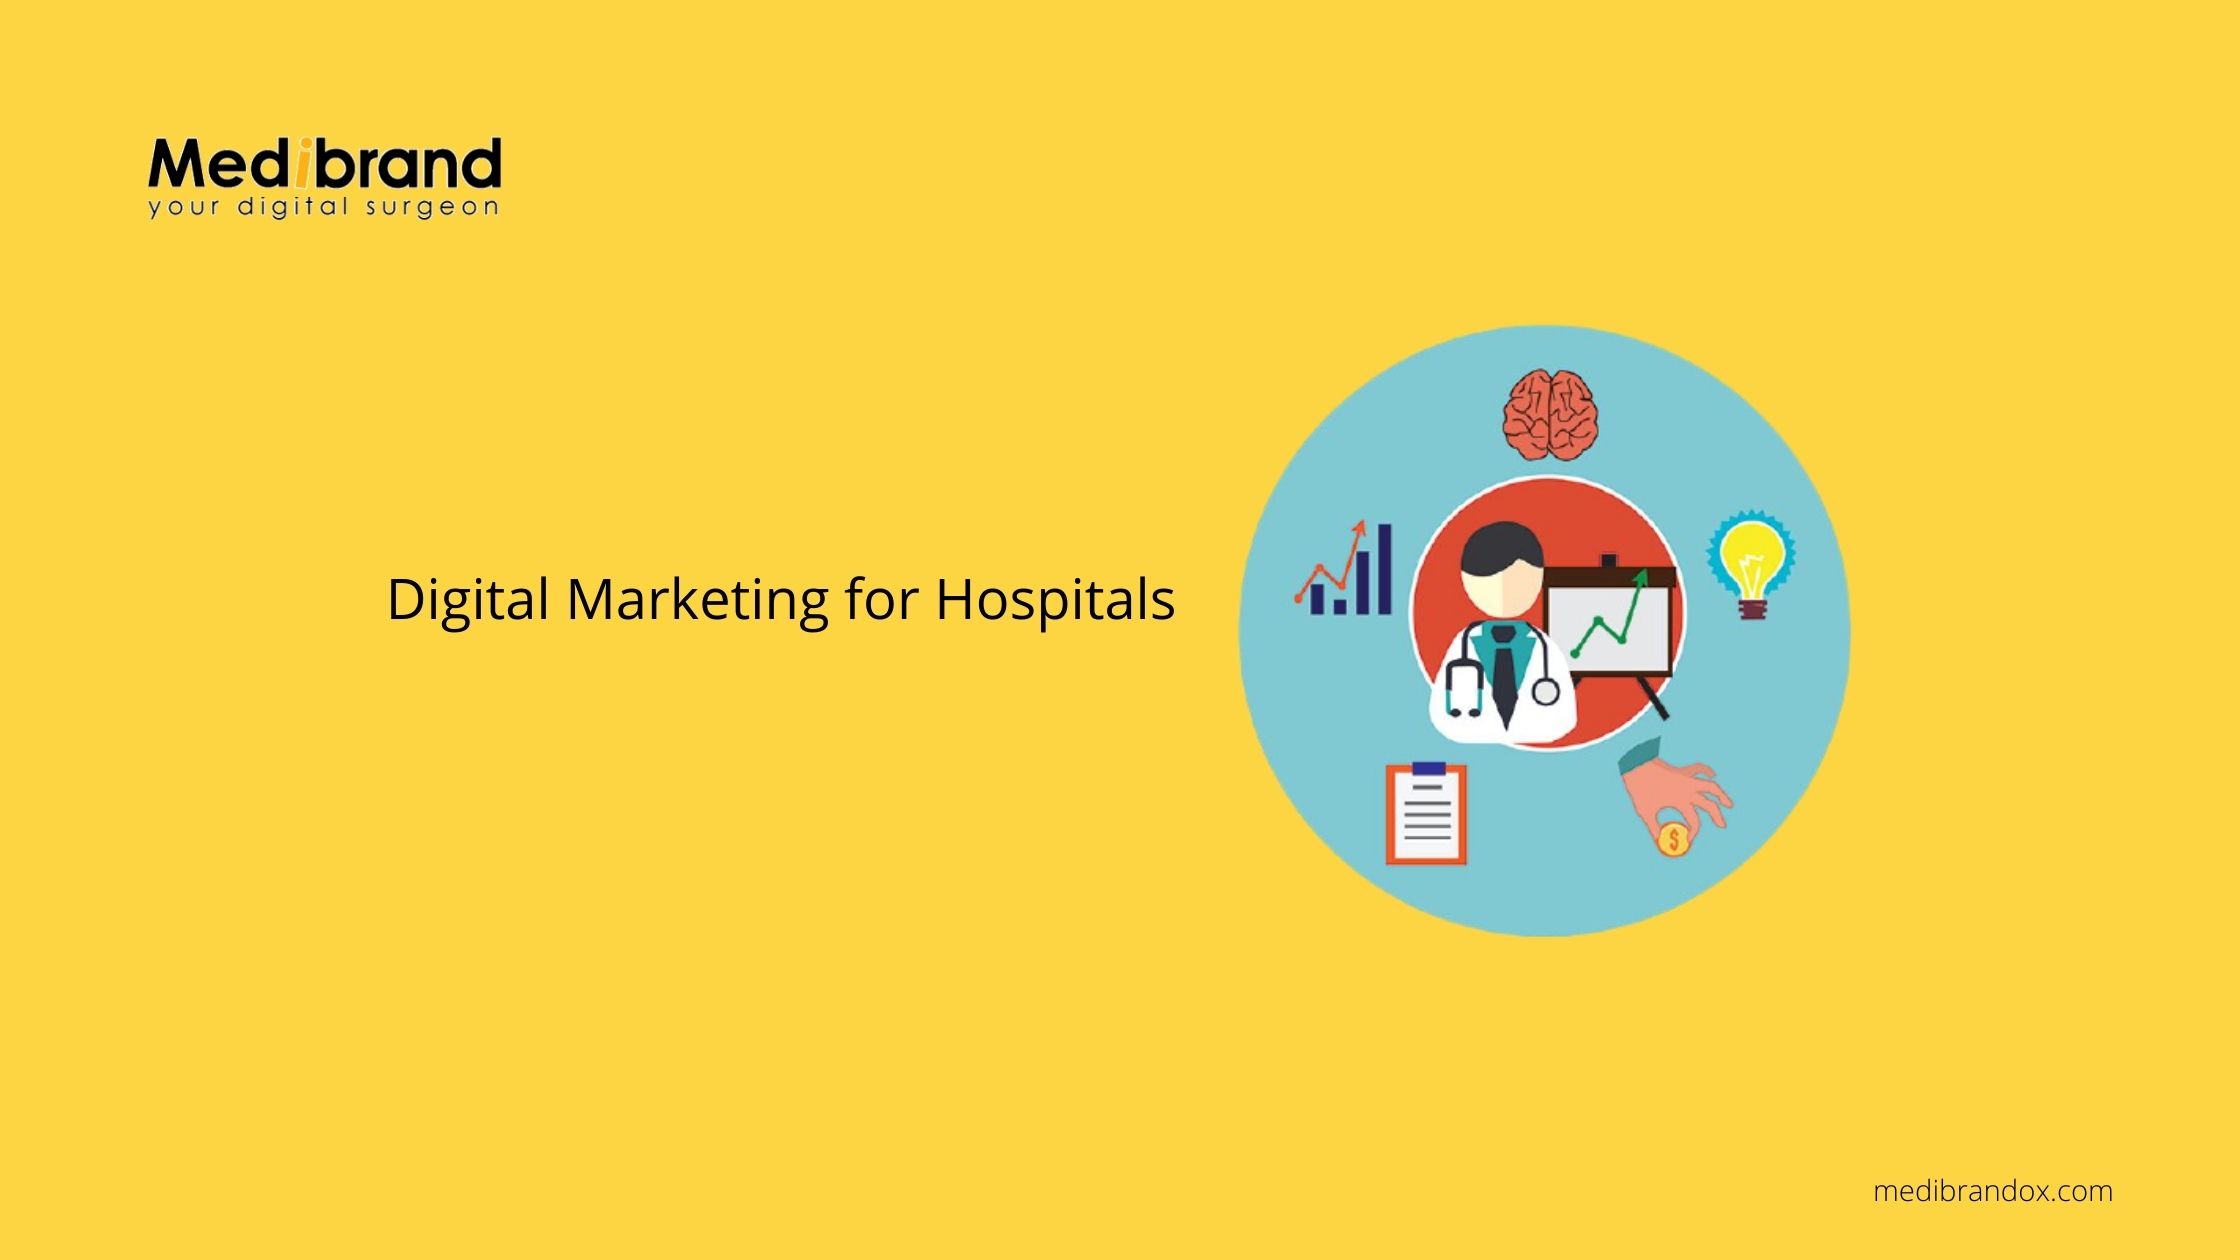 Article about Best Digital Marketing Company For Hospitals